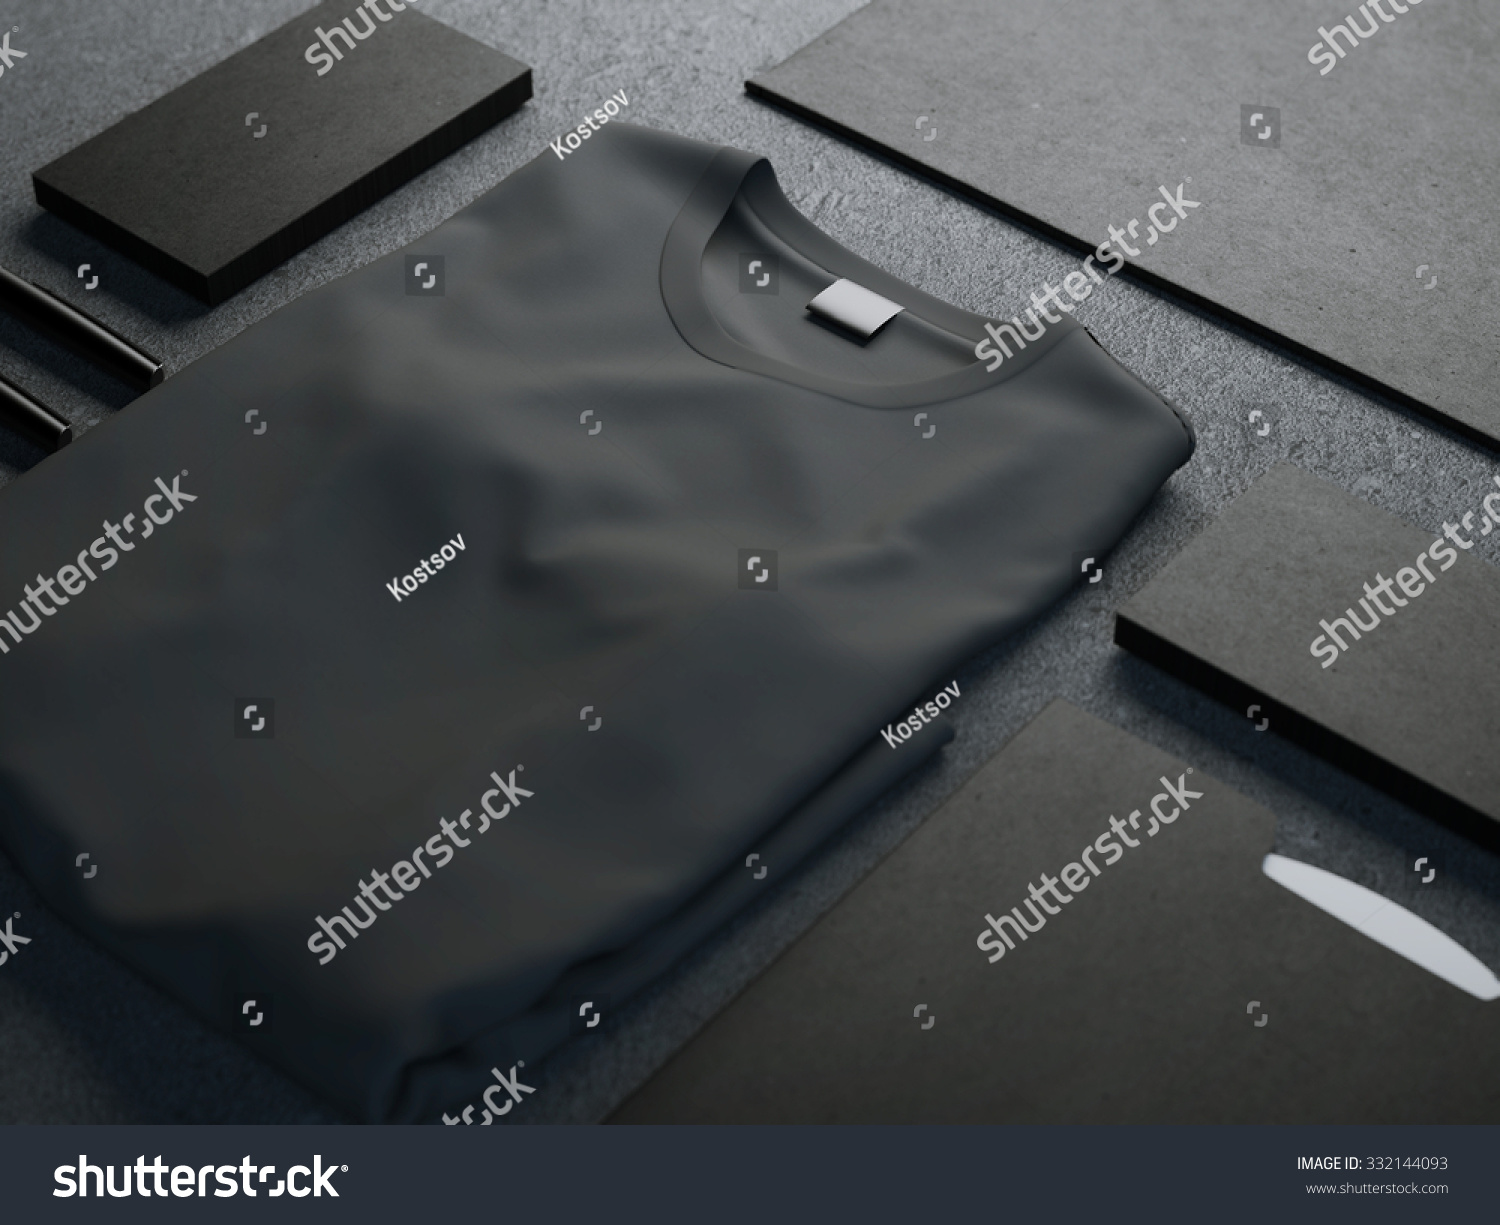 Download Dark Mockup With Blank T-Shirt Stock Photo 332144093 ...